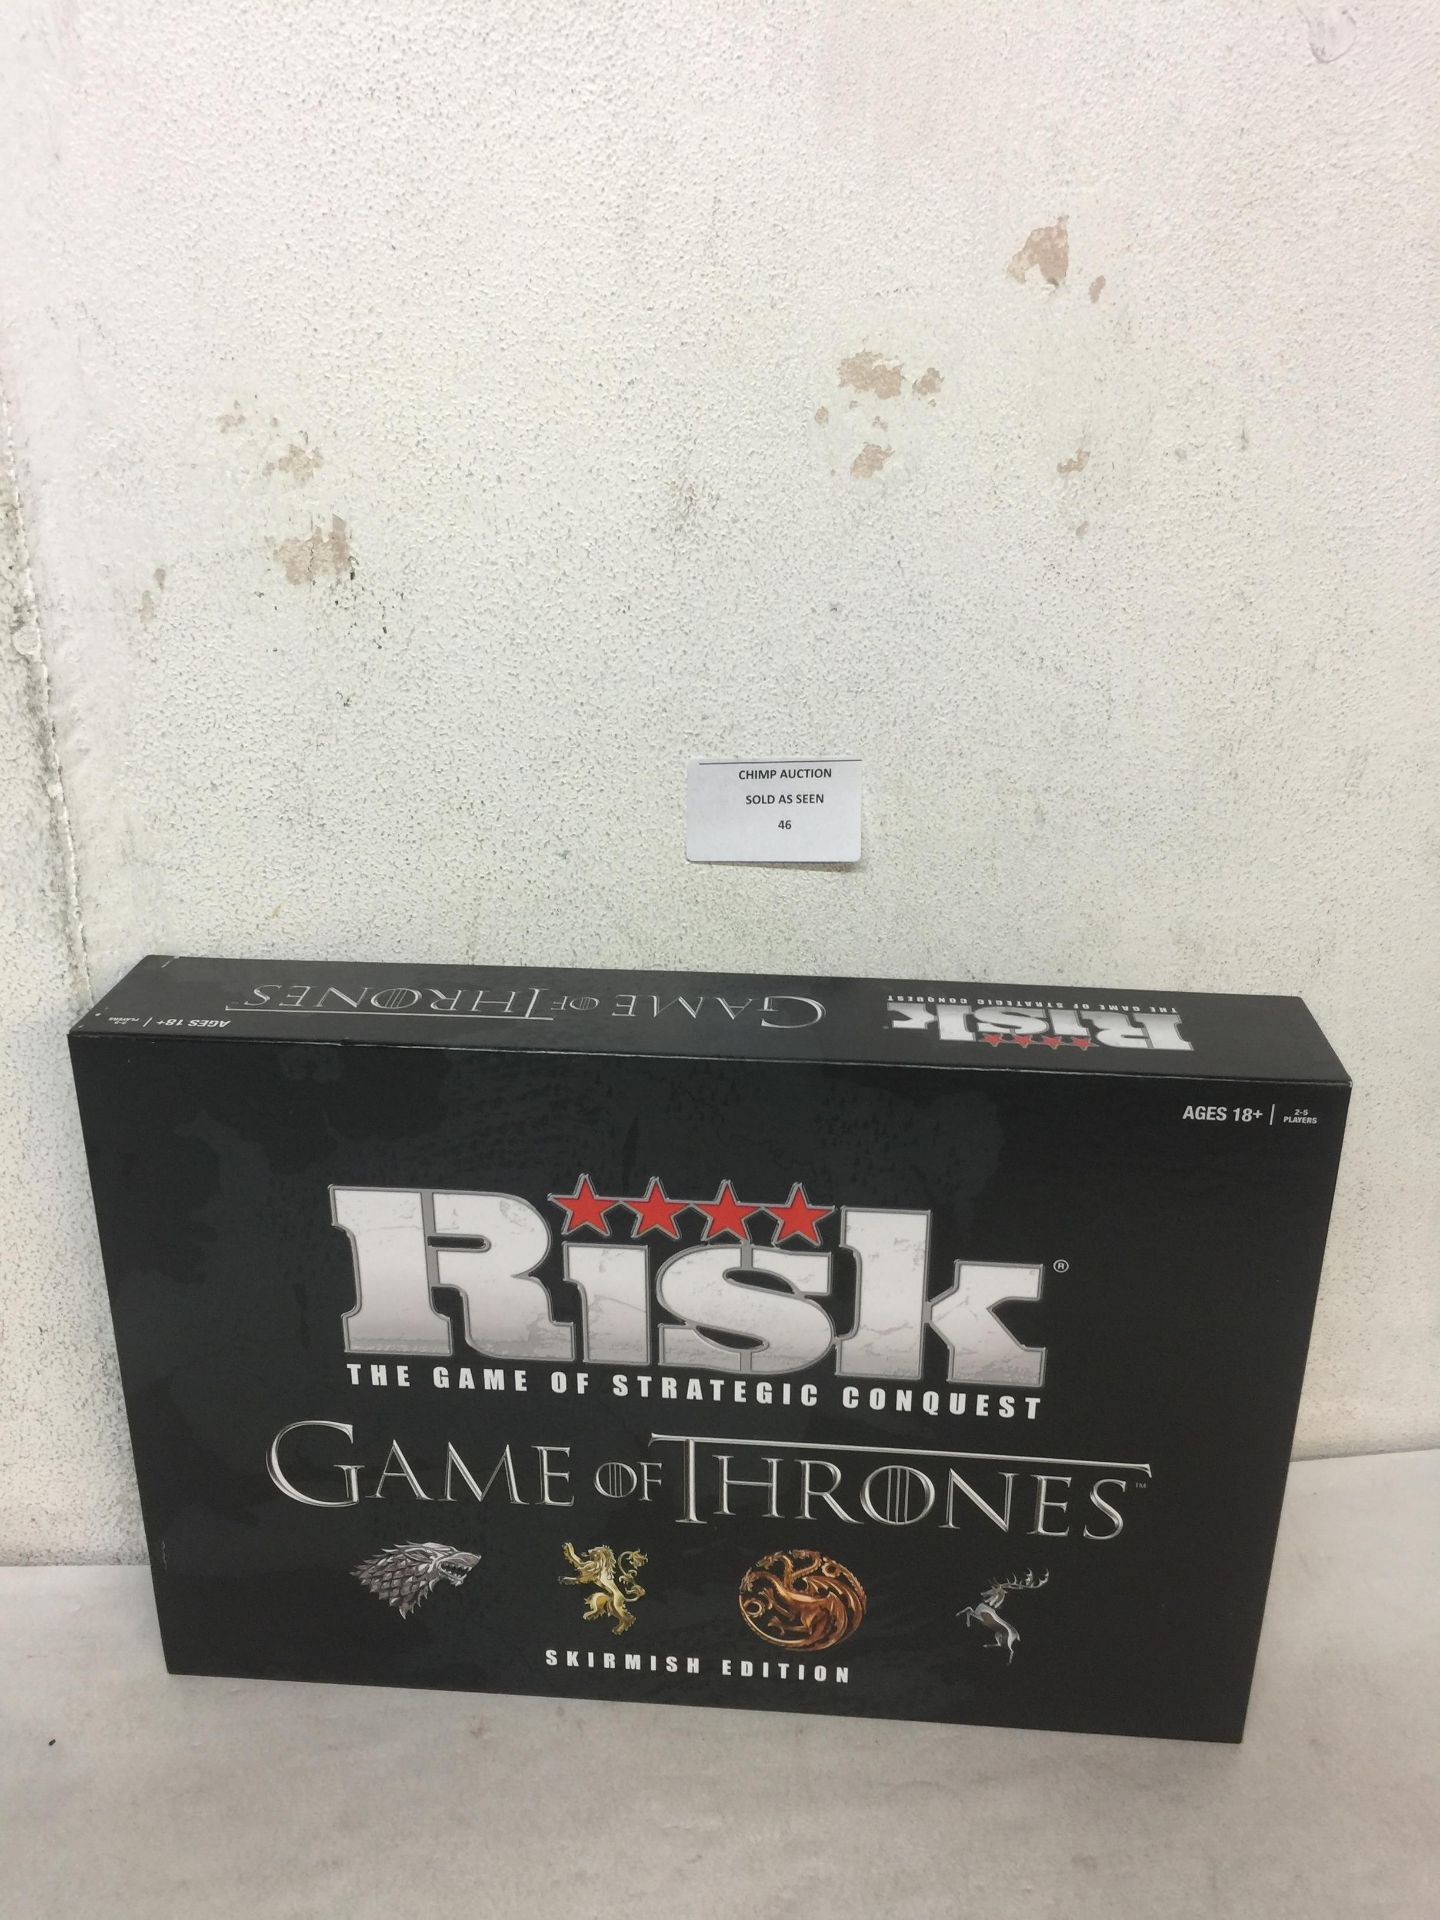 Game of Thrones Risk board game - Skirmish Edition